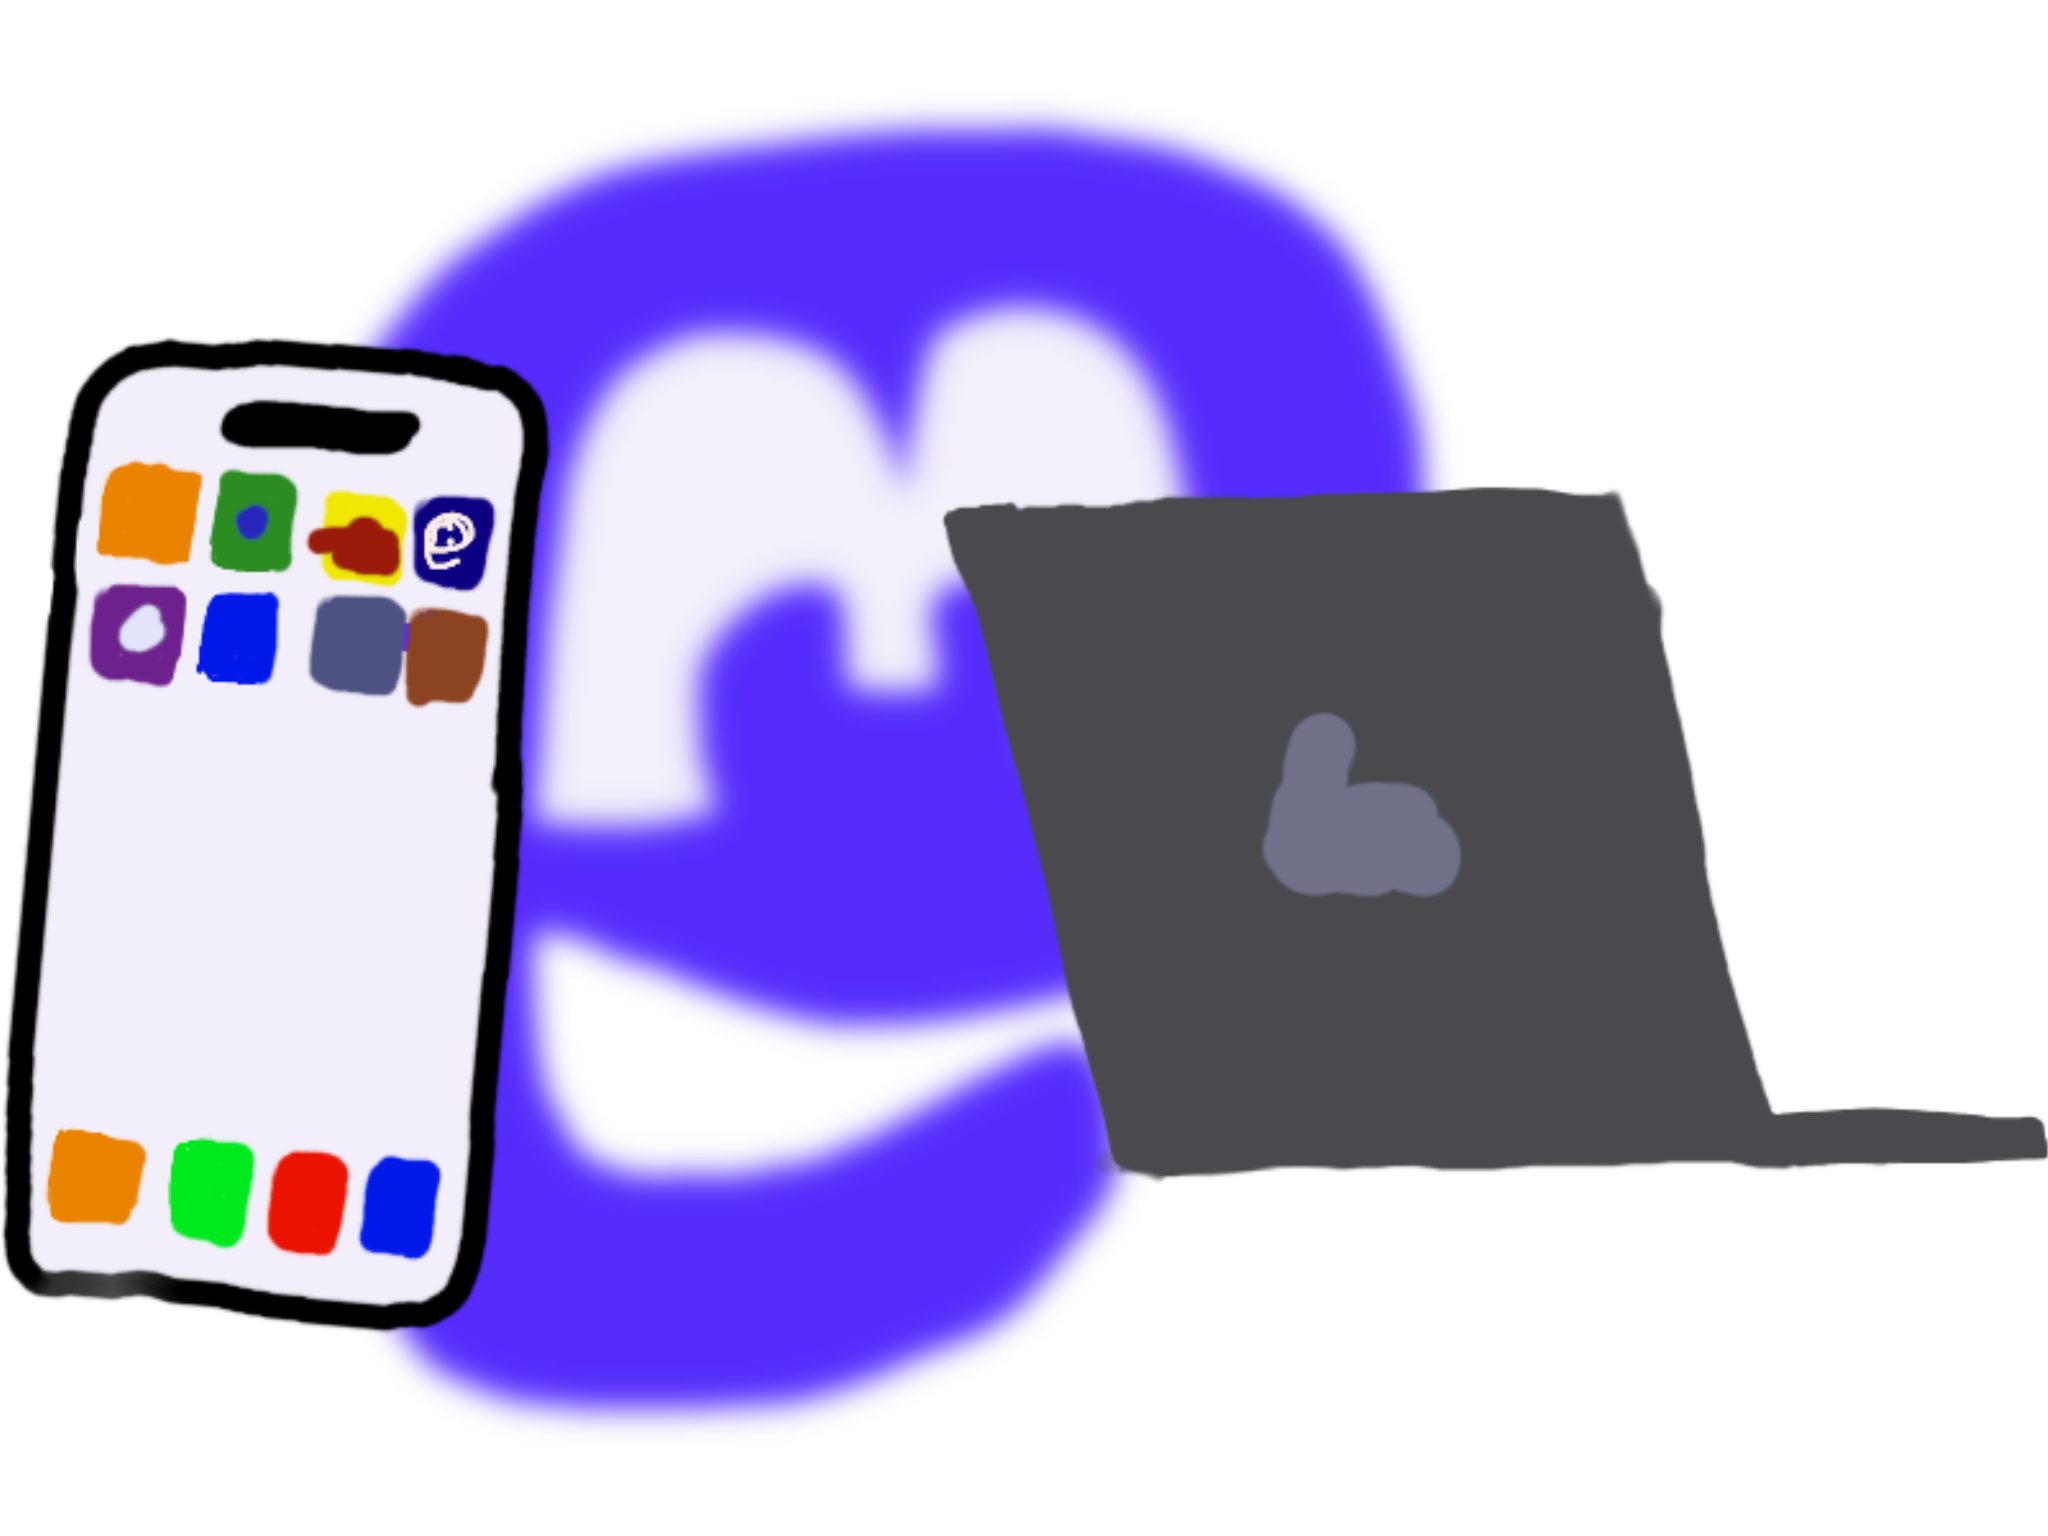 A handdrawn picture. It shows a smartphone on the left, a laptop computer on the right and a blurry Mastodon-logo in the background.